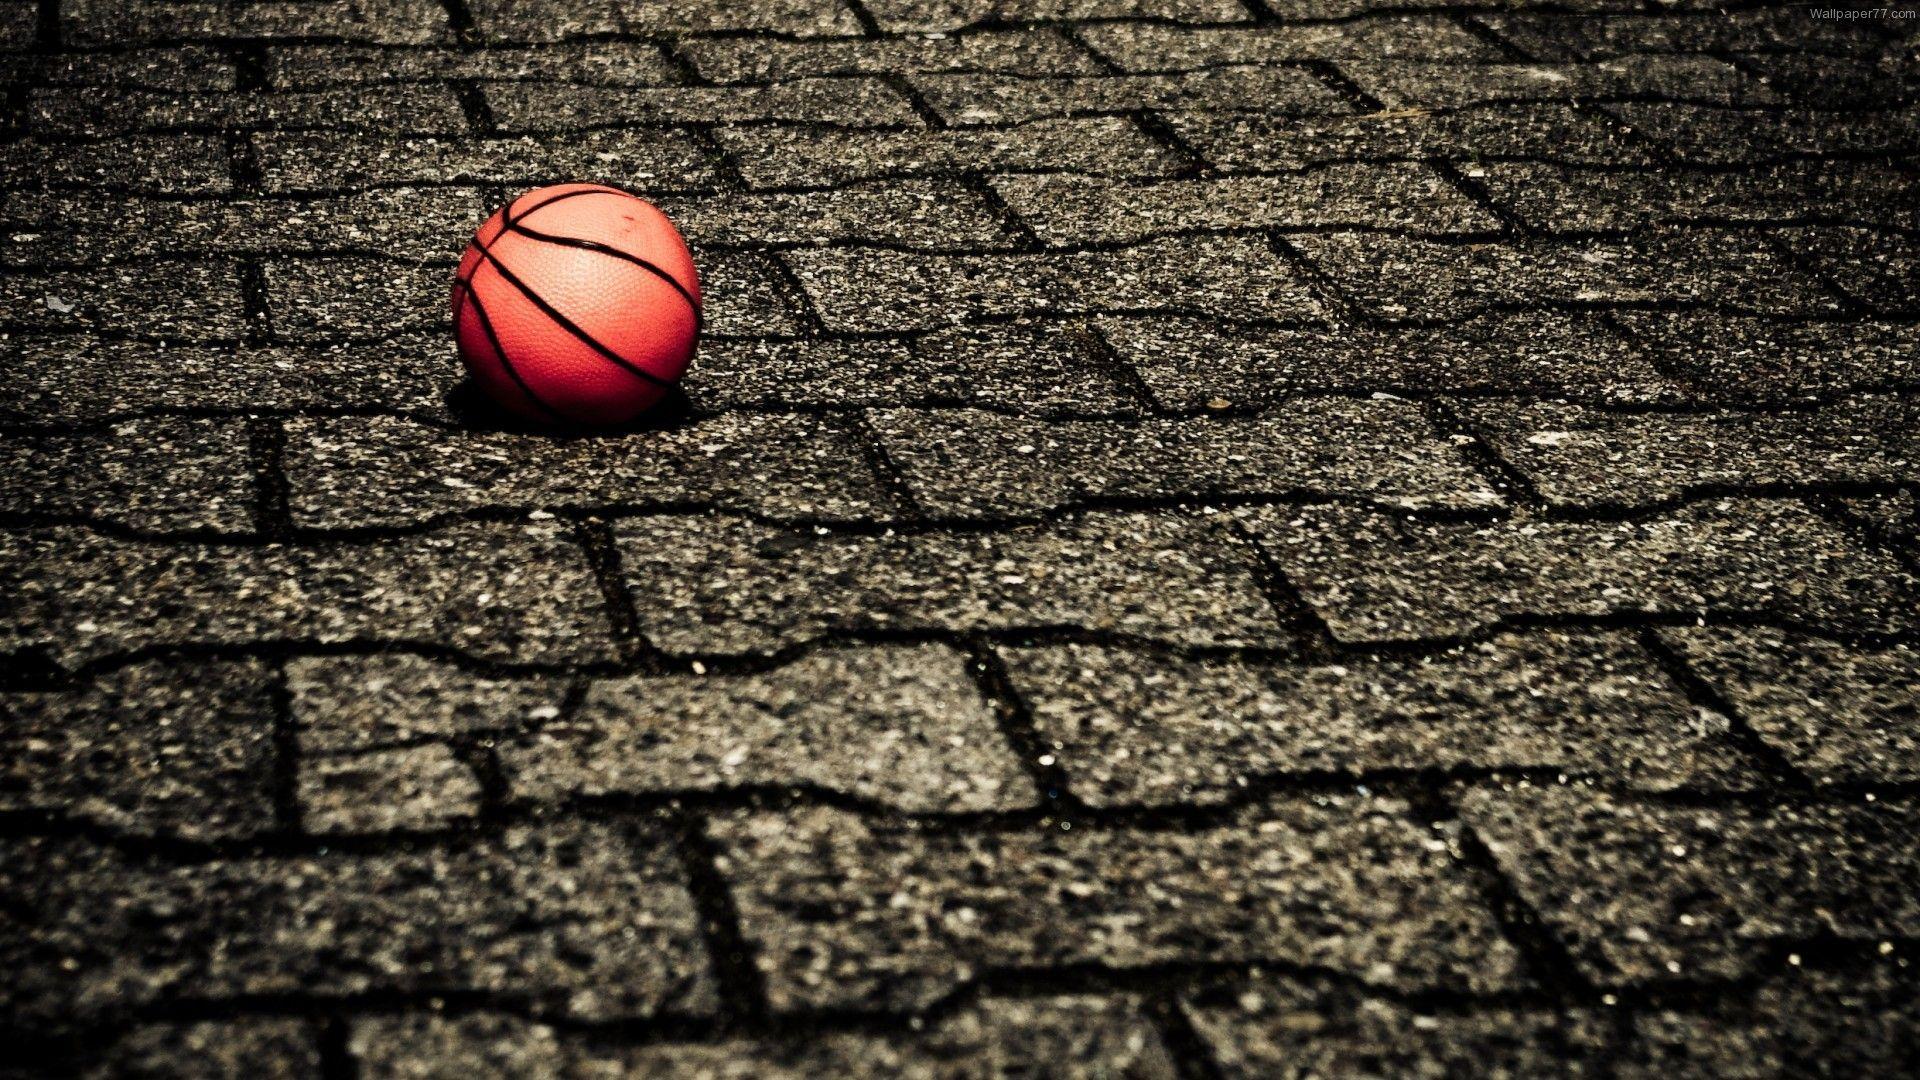 Basketball Game Latest HD Wallpaper Crazy Themes, 1920x1080px HD